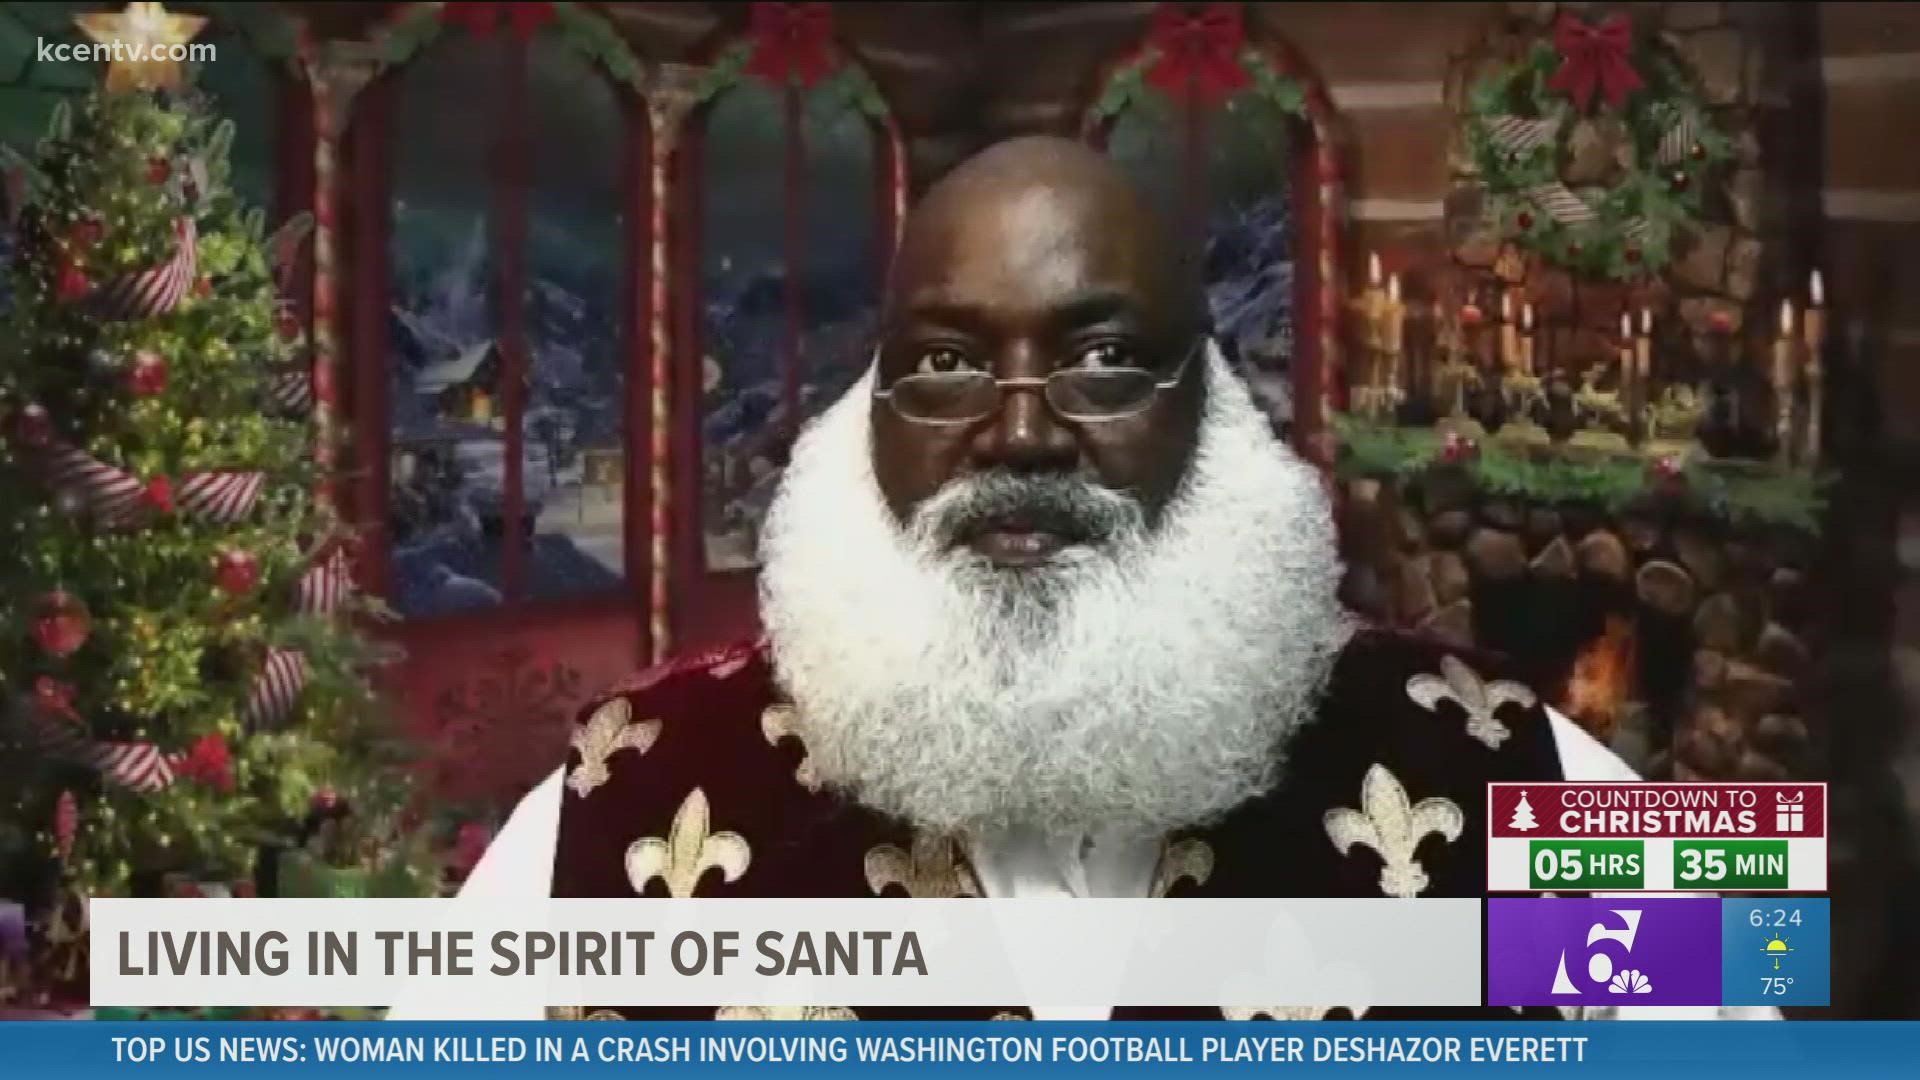 Here is a Christmas story how one Atlanta Santa Claus is spreading the spirit of Christmas to everyone he meets.